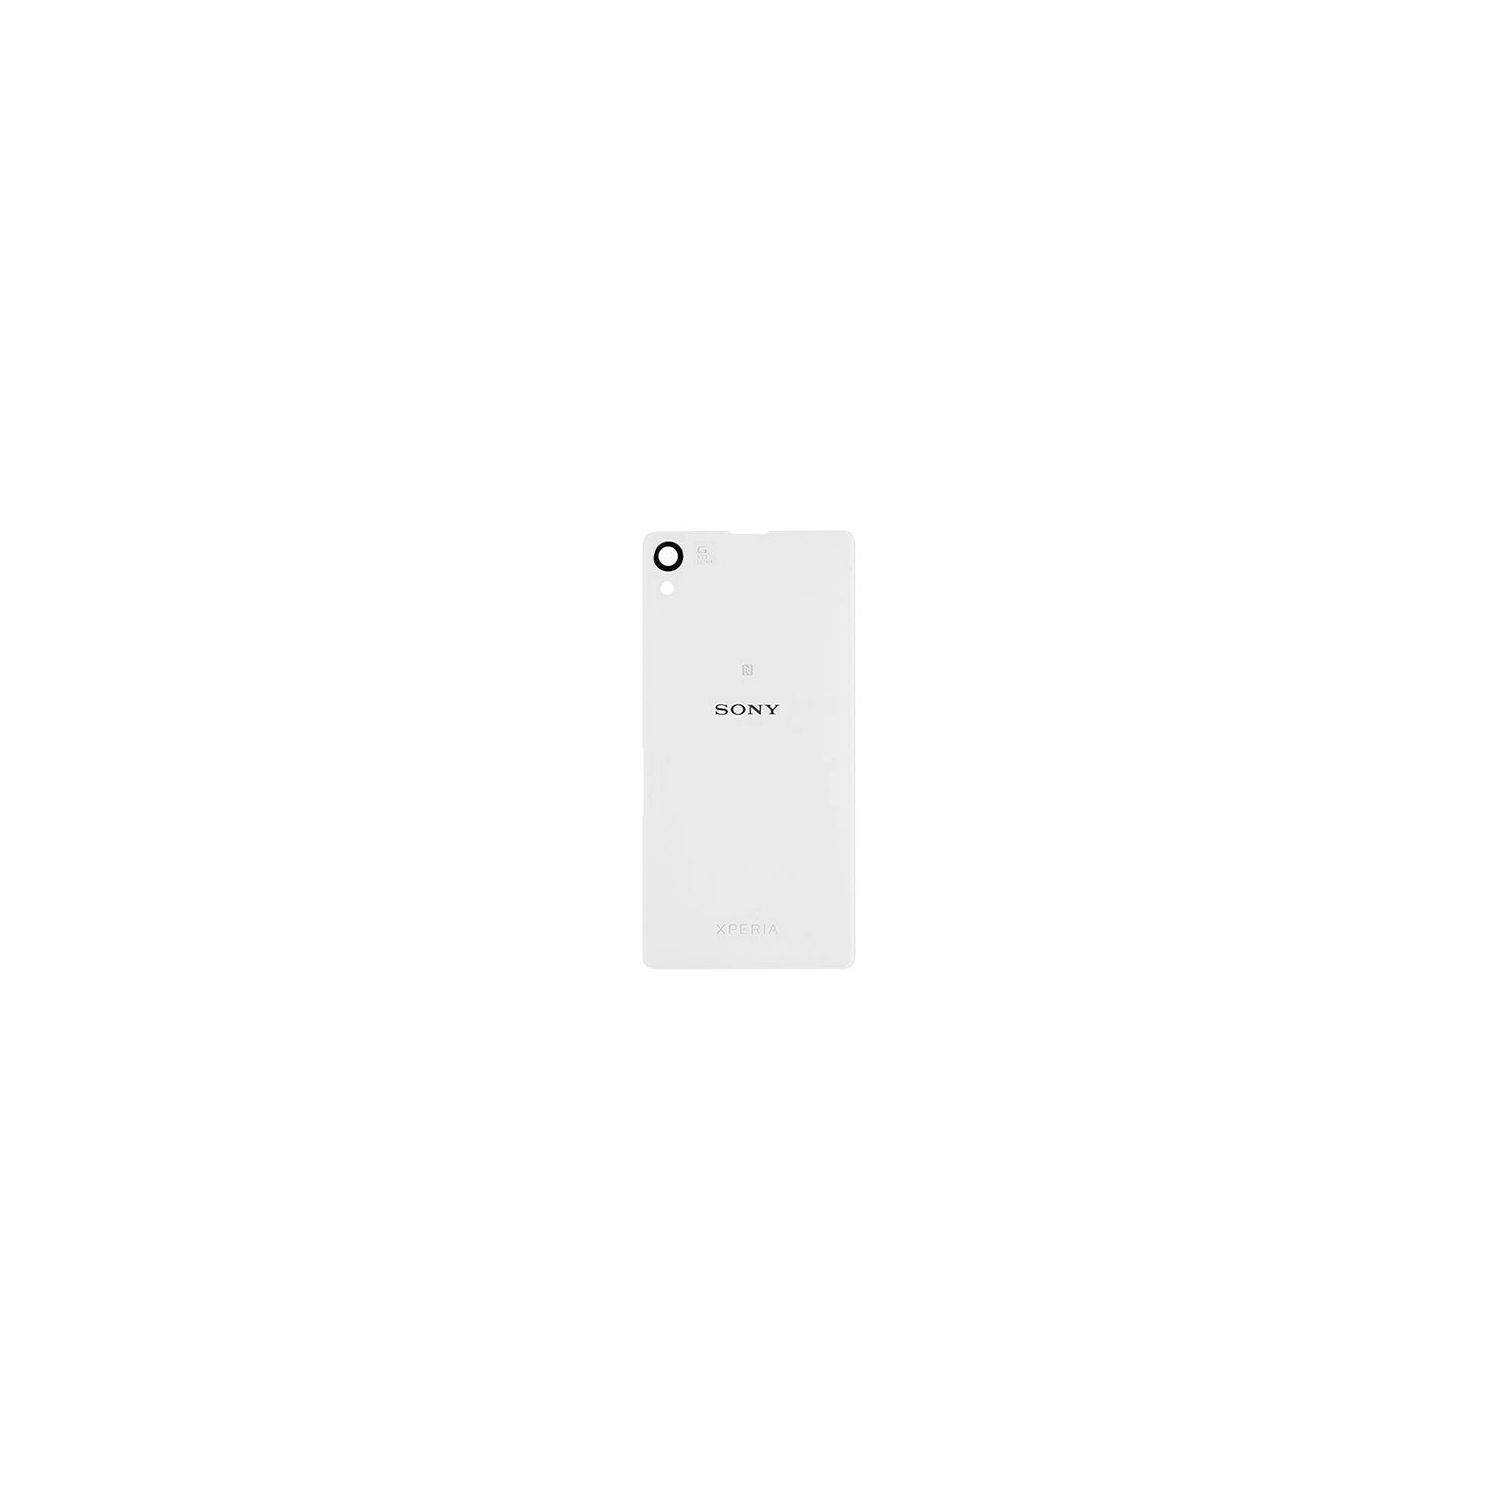 Sony Xperia Z2 Battery Door Back Cover – White